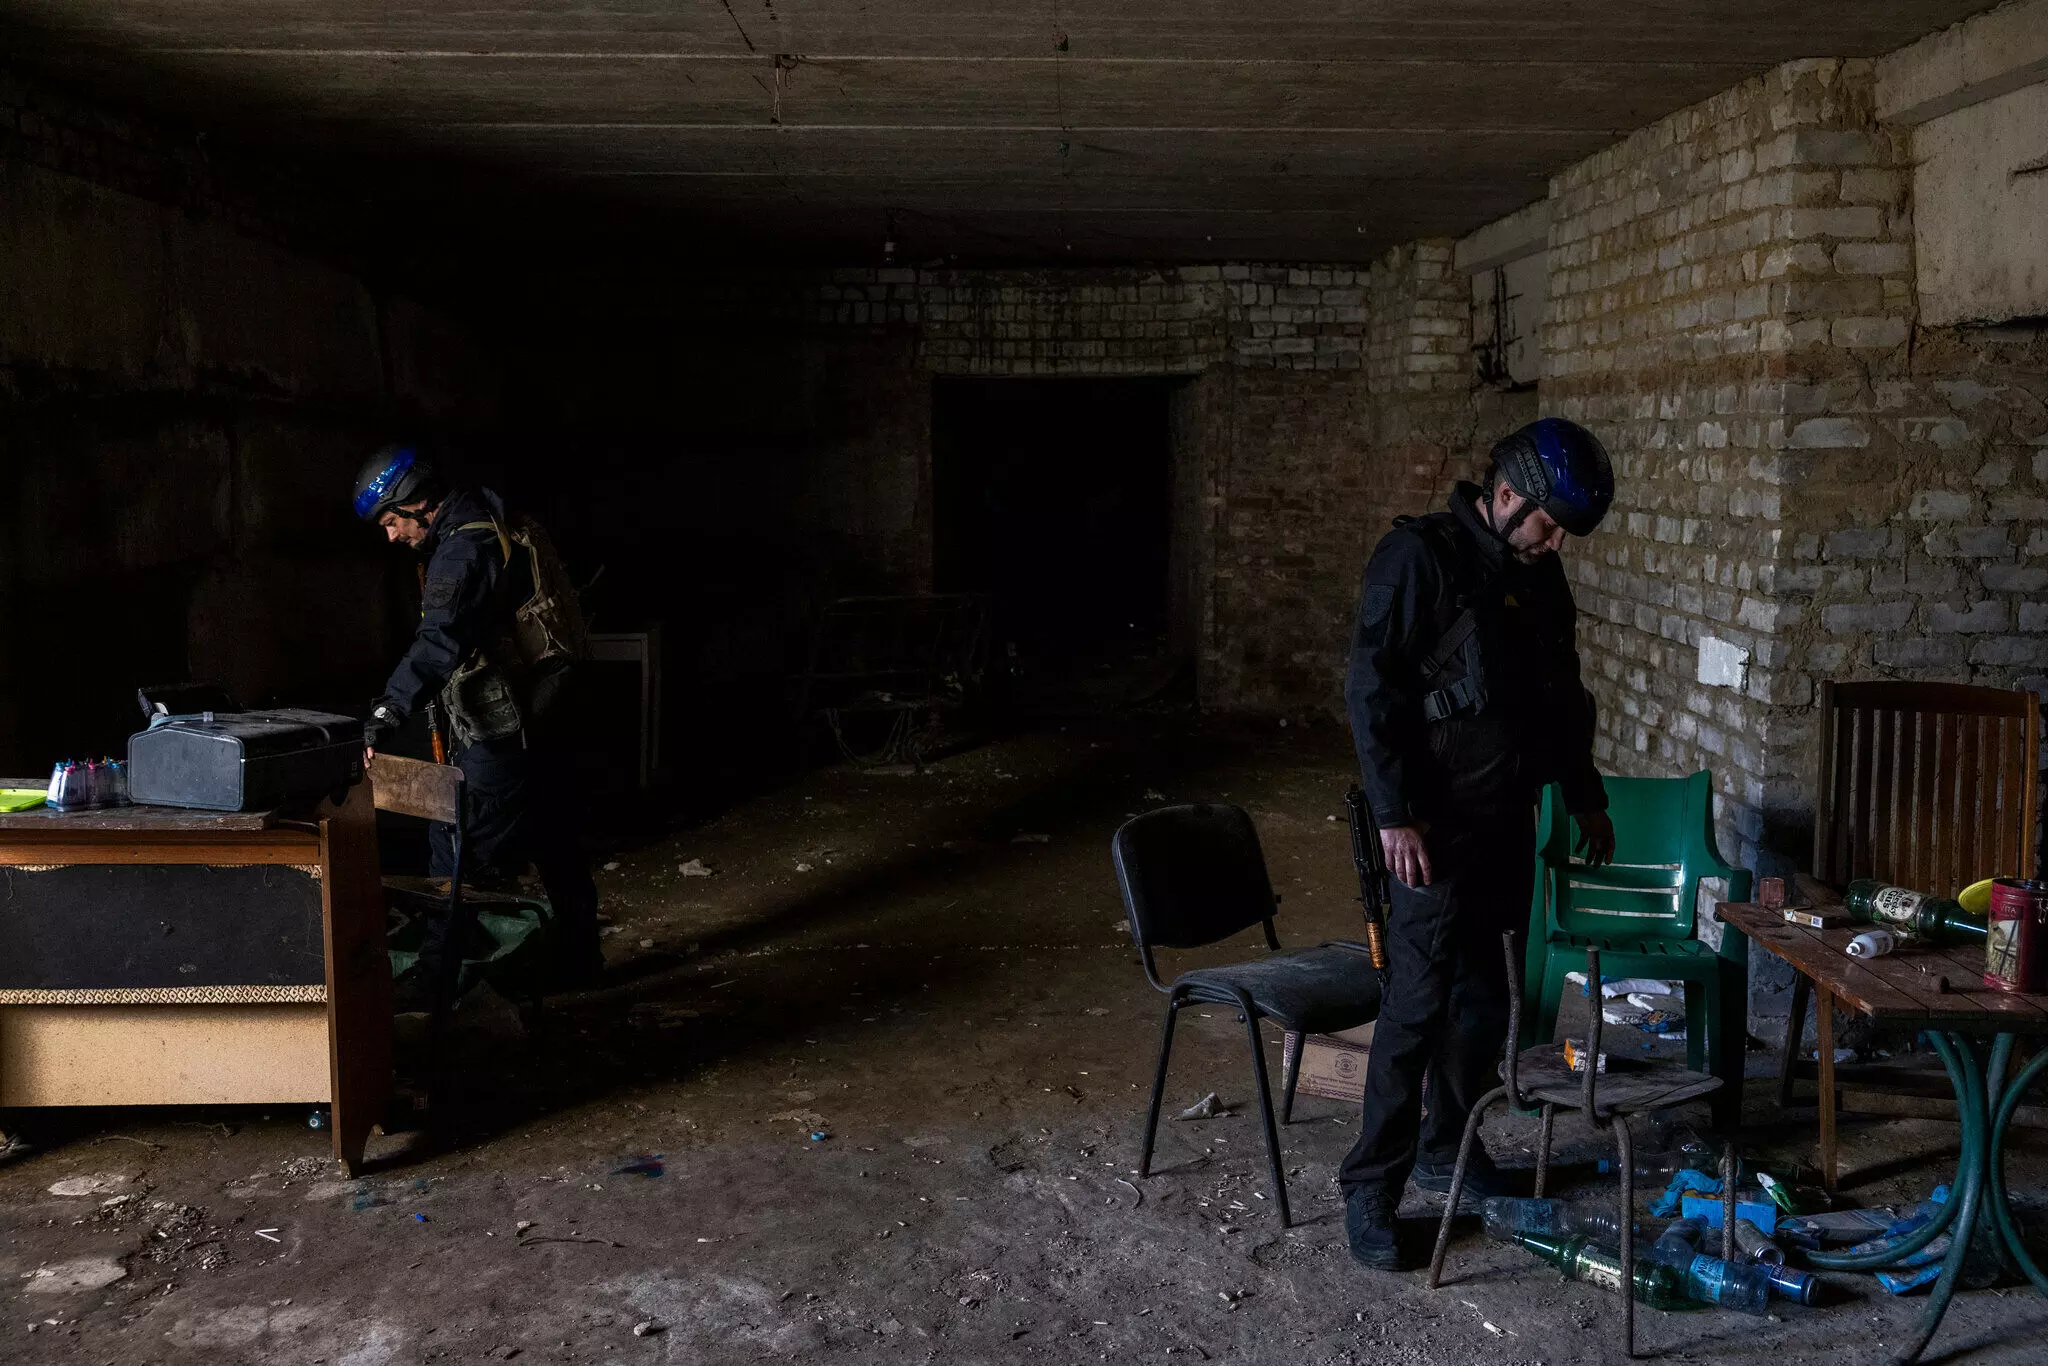 Ukrainian police found torture camps in freed Kharkiv